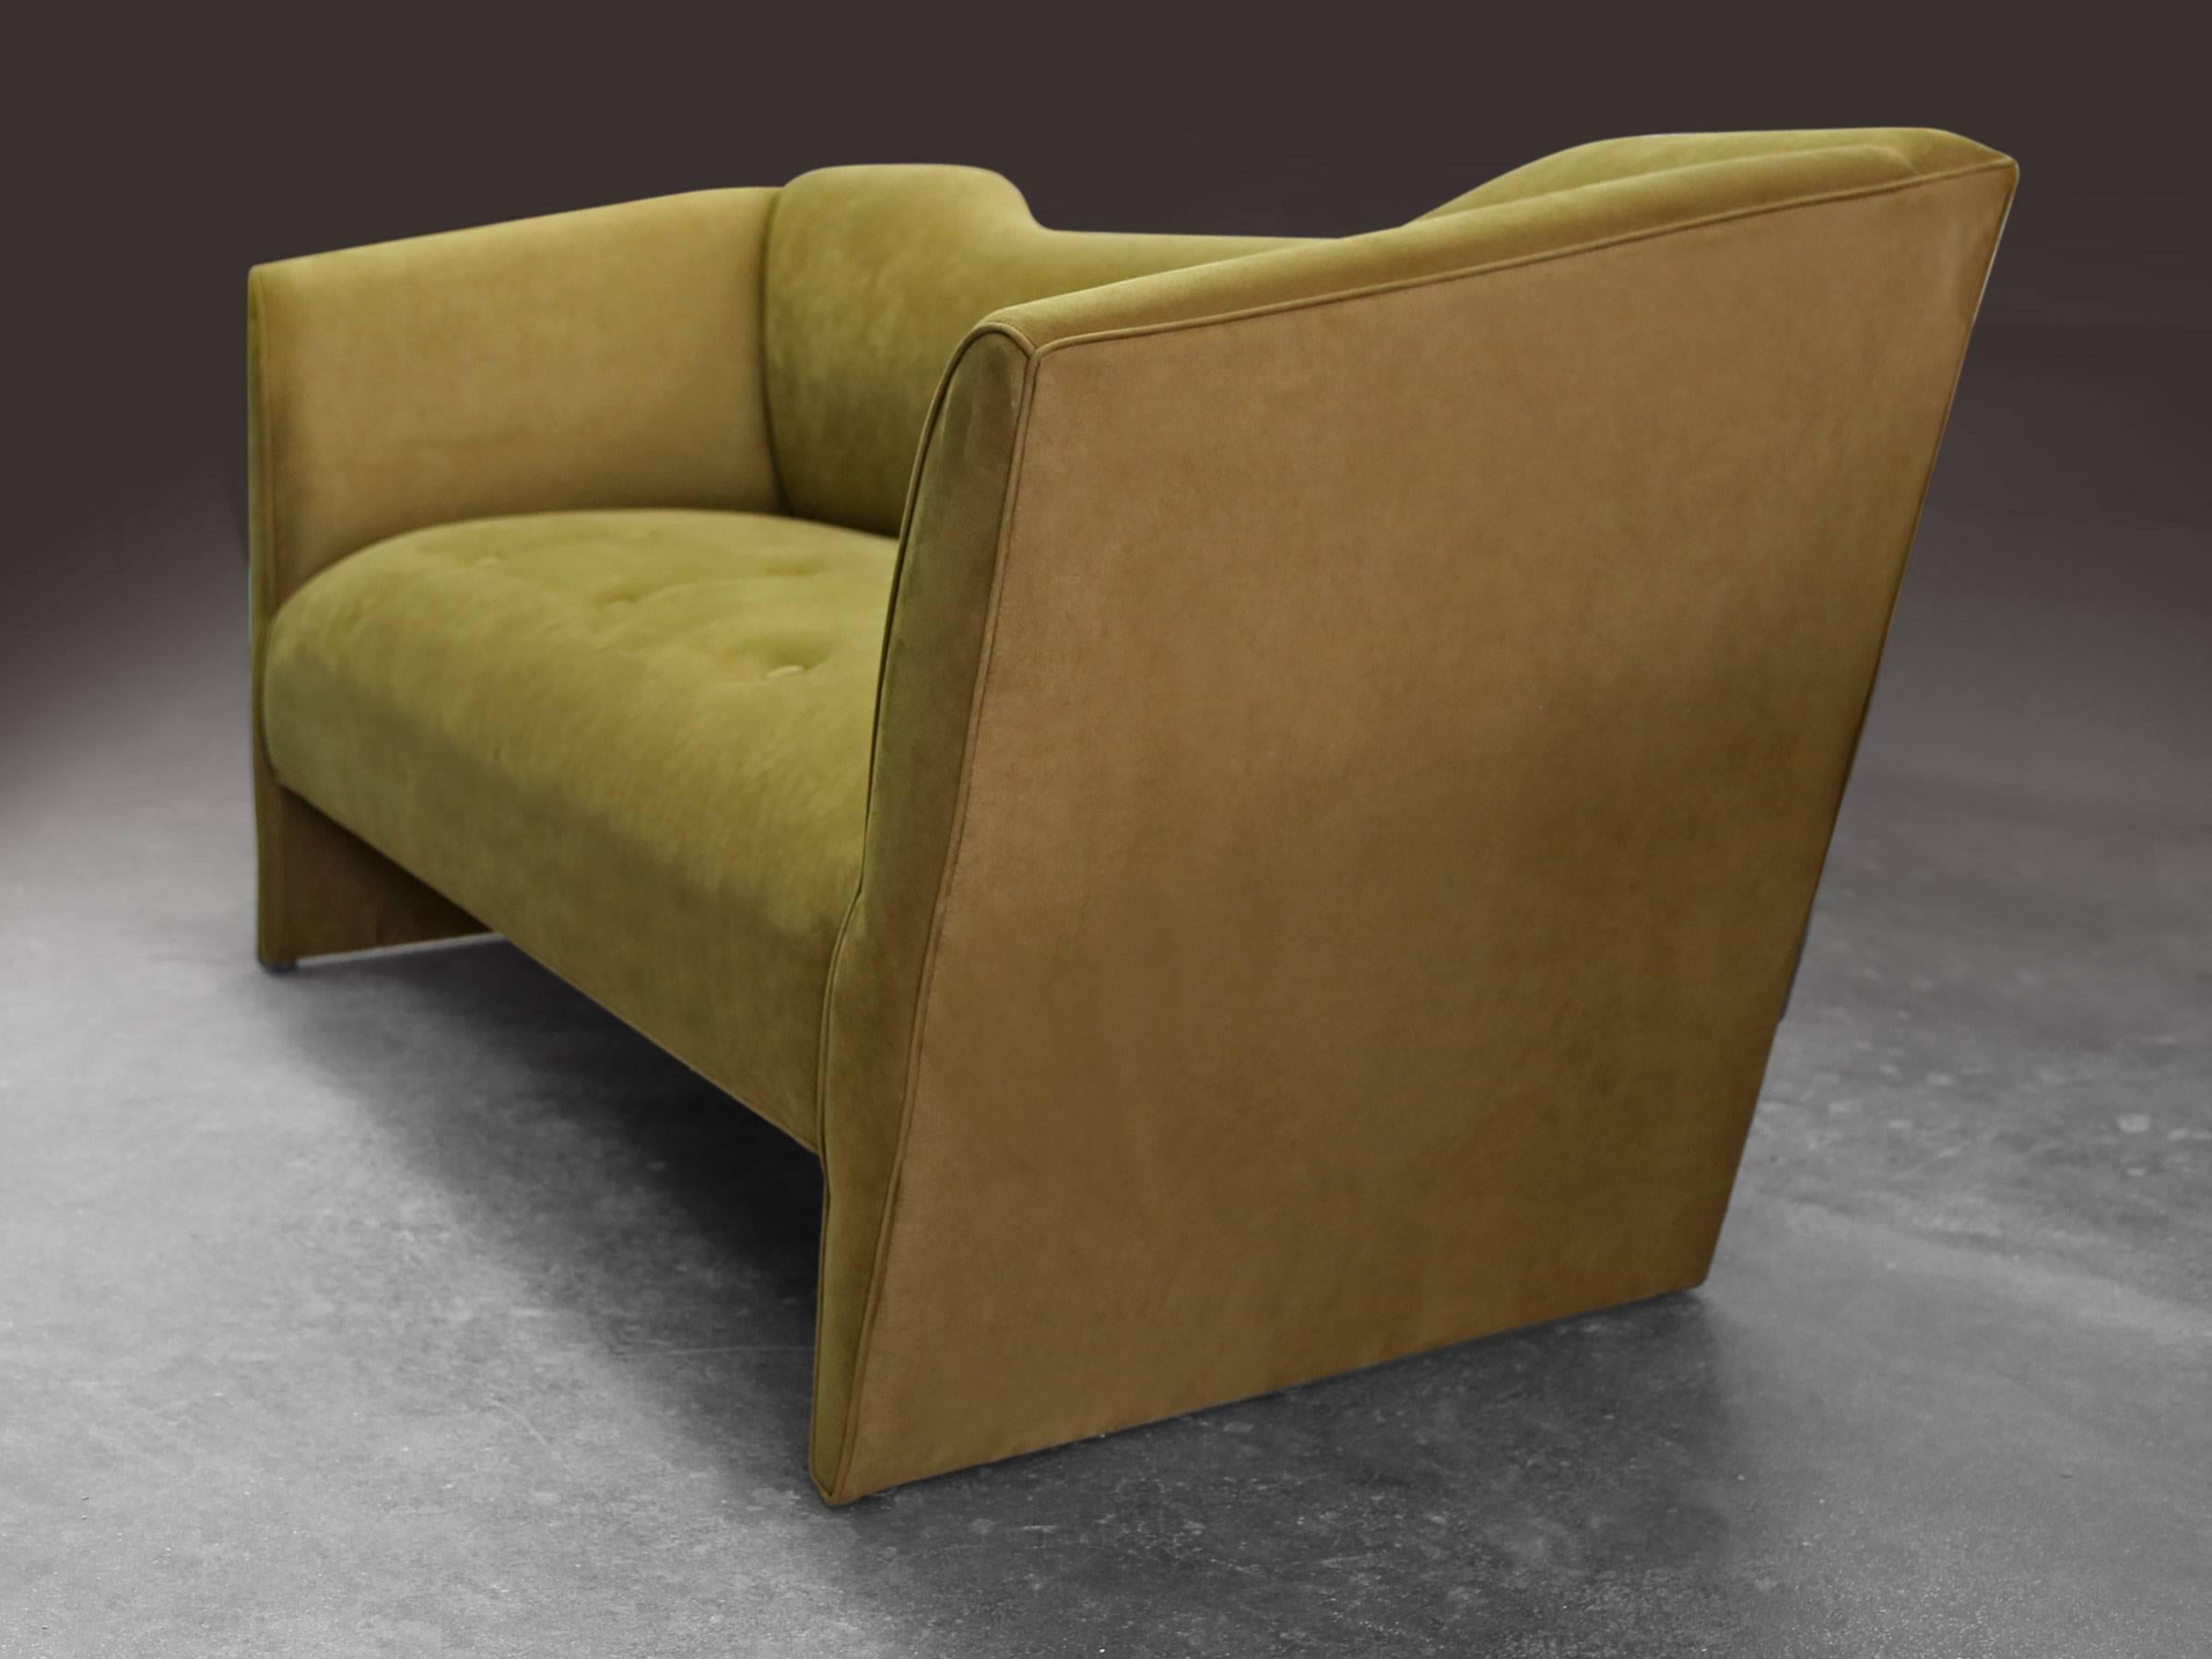 Sentient Memphis Inspired Nersi Sofa in Green In Excellent Condition For Sale In Brooklyn, NY